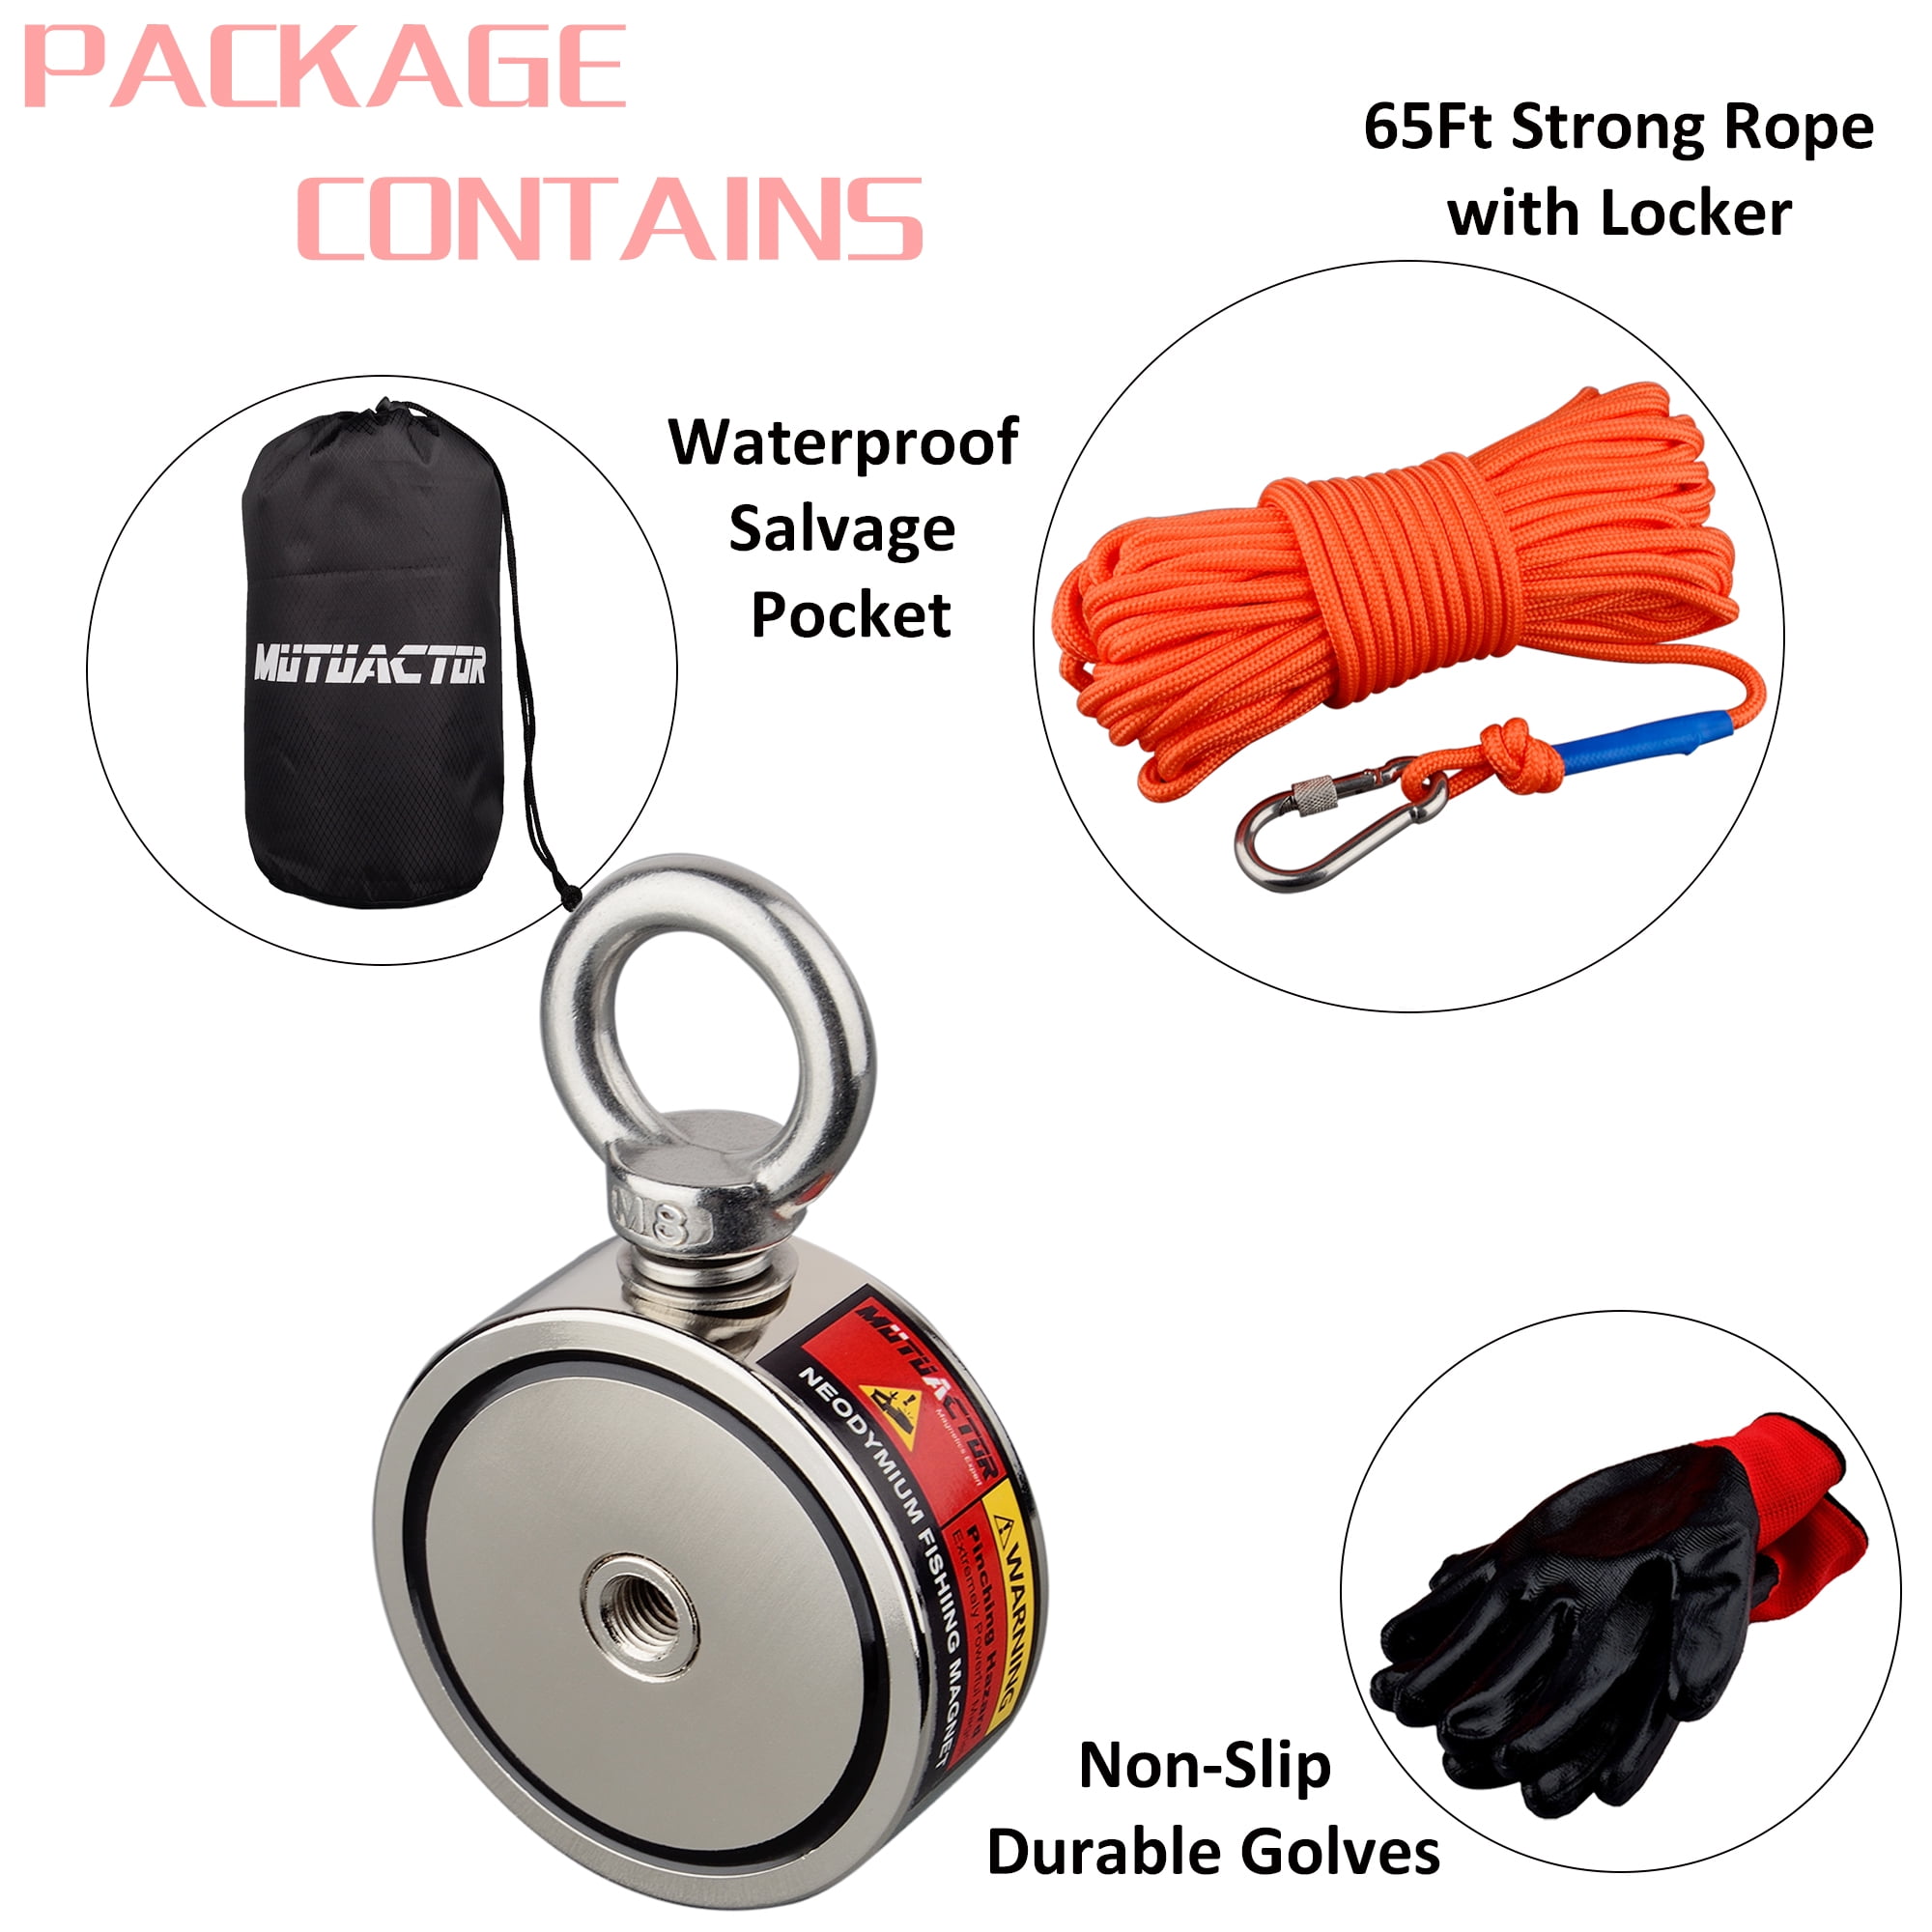  MUTUACTOR Neodymium Fishing Magnet,Double Sided Combined  1100lbs Powerful Fishing Magnet Heavy Duty with 65Ft Salvage  Rope,Durability Gloves,Waterproof Bag for Retrieving Tools Find Treasure :  Industrial & Scientific